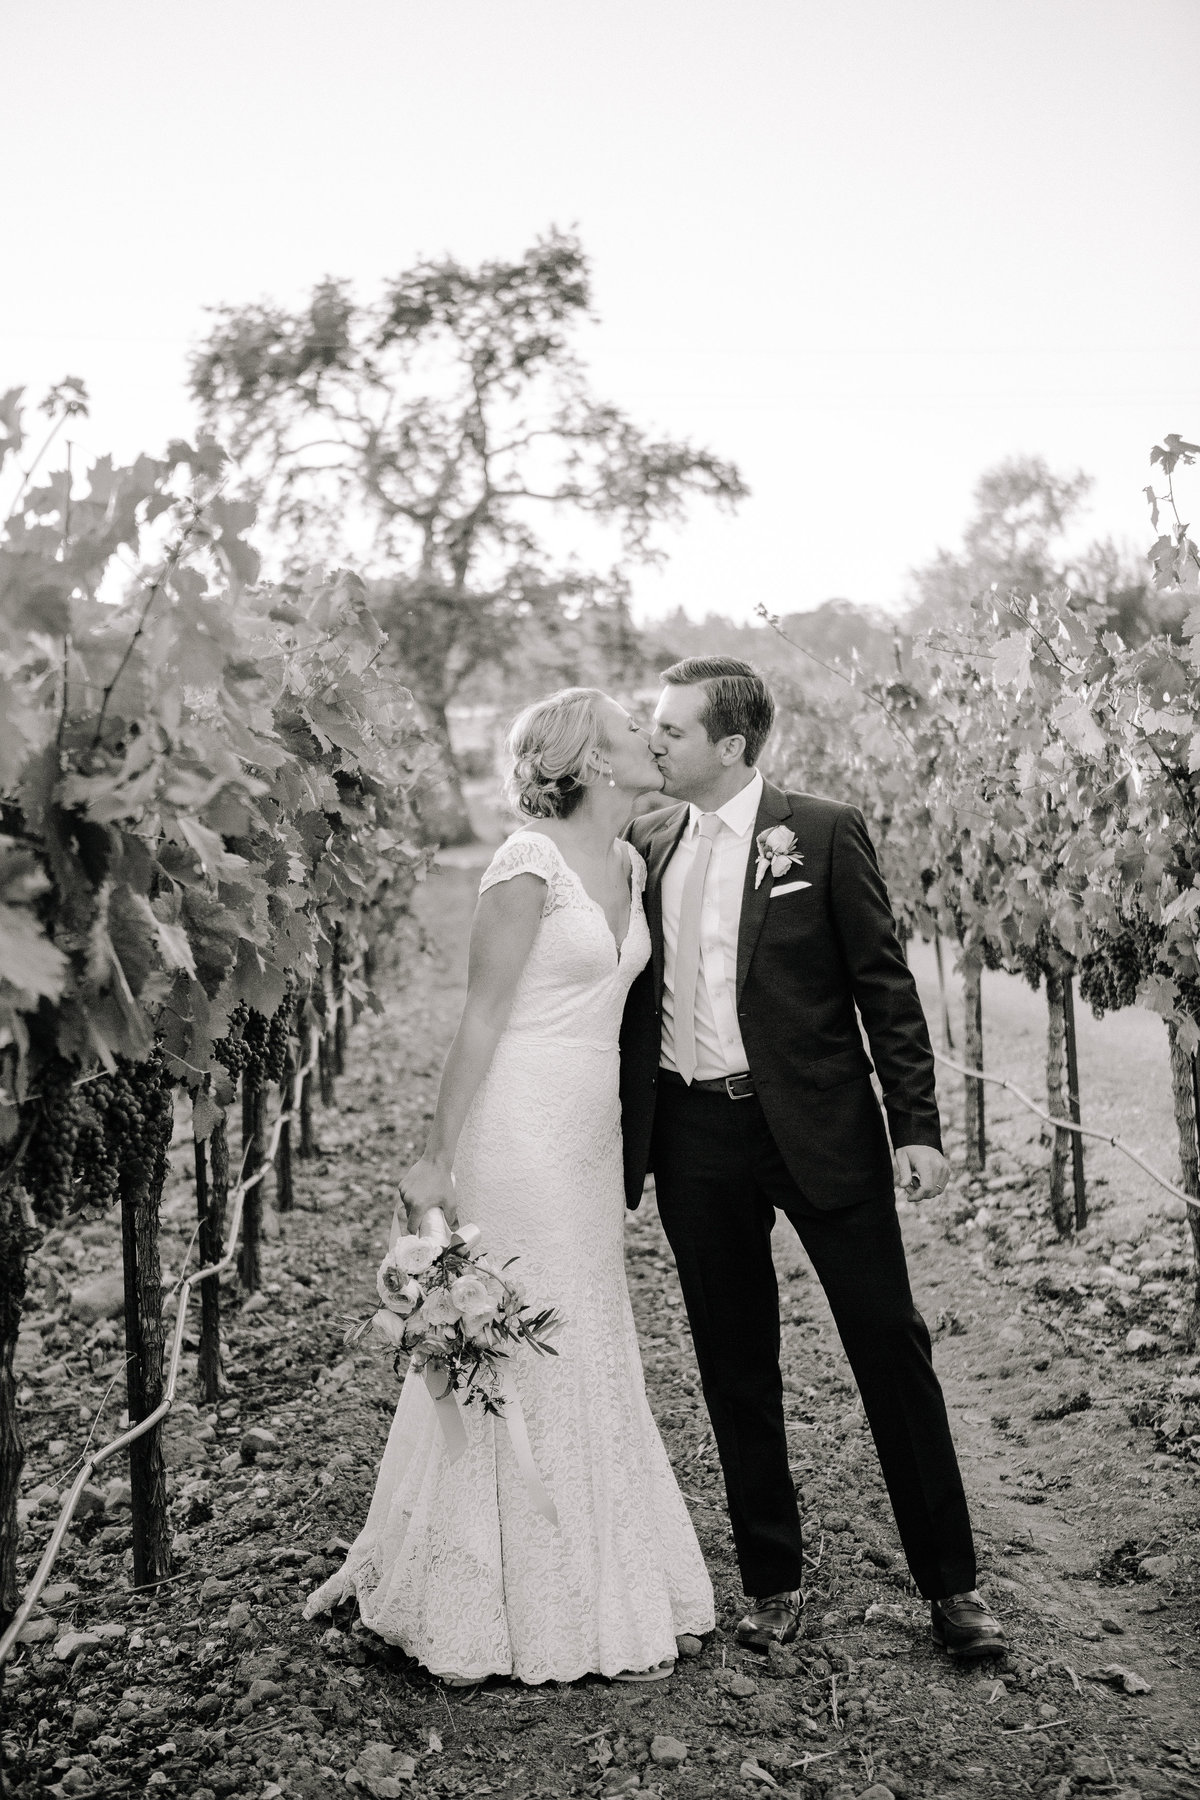 Outdoor wedding in the vines at Beltane Ranch in Sonoma.